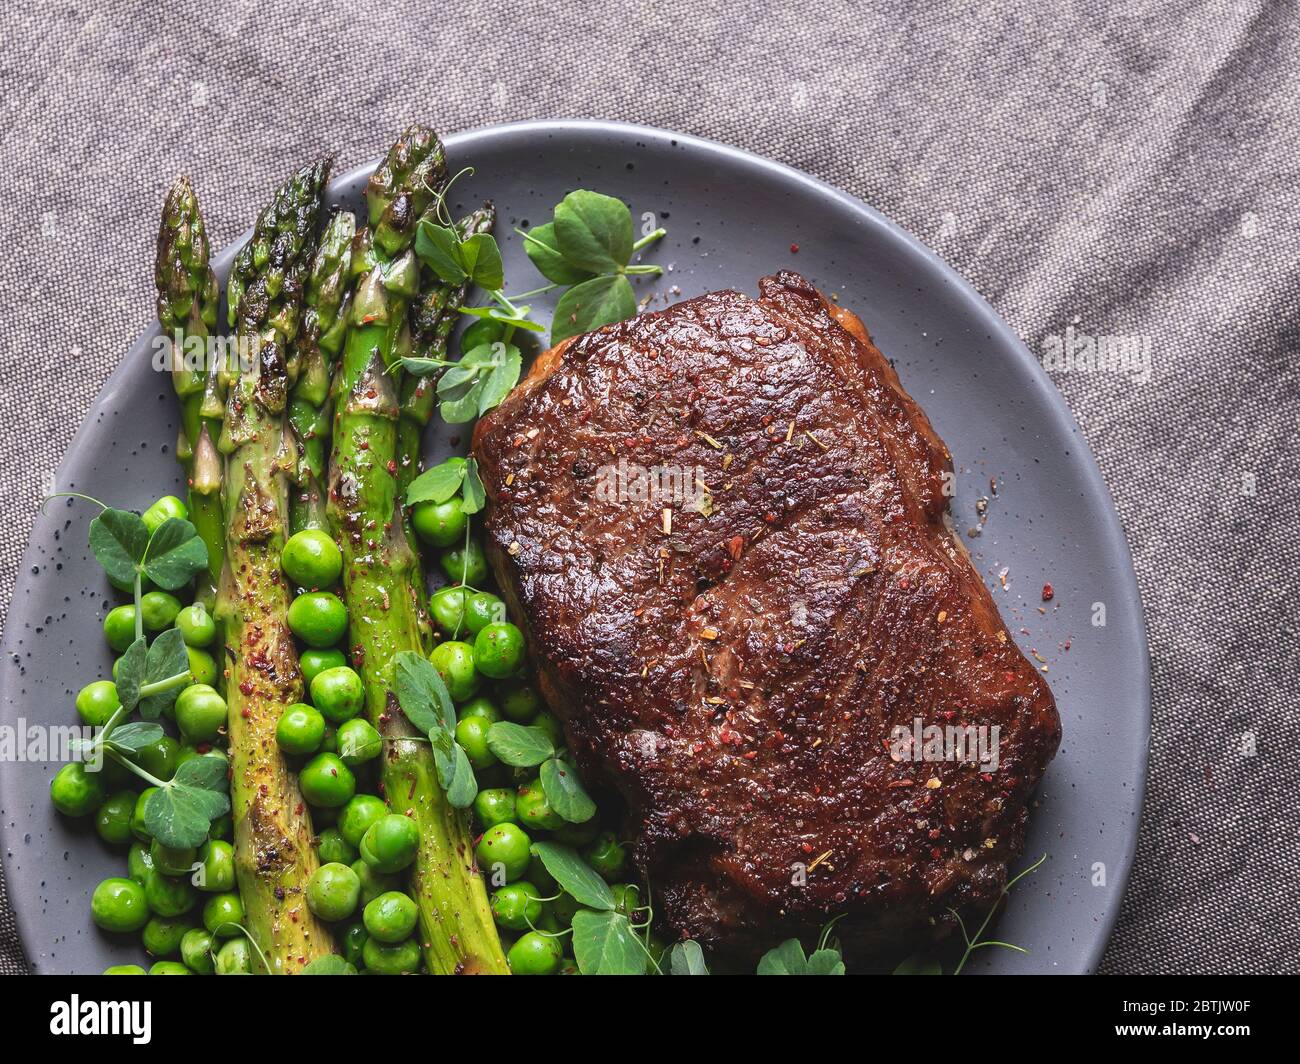 juicy roasted beef steak, mutton with asparagus green peas on a plate, close up Stock Photo